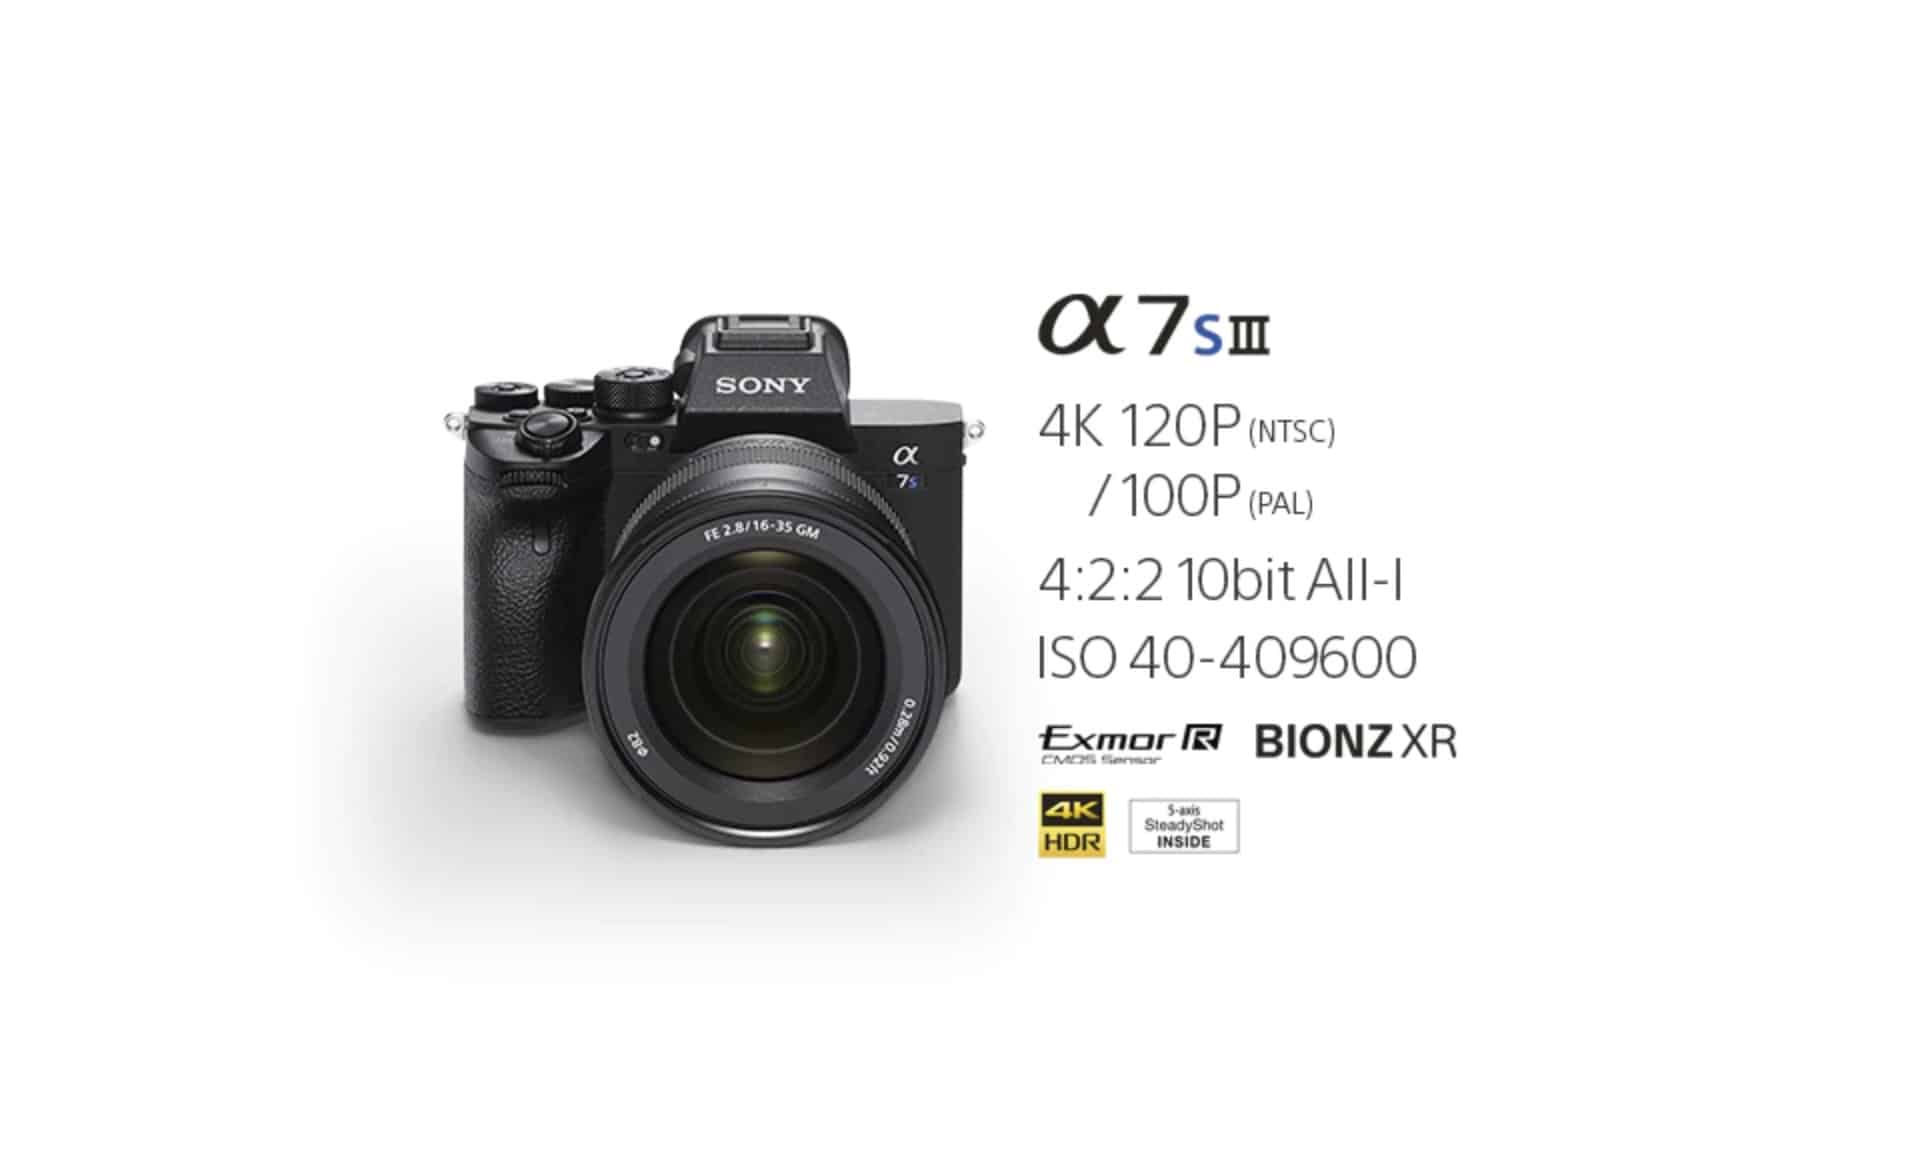 Sony Alpha 7S III Combines Supreme Imaging Performance with Classic “S” Series Sensitivity